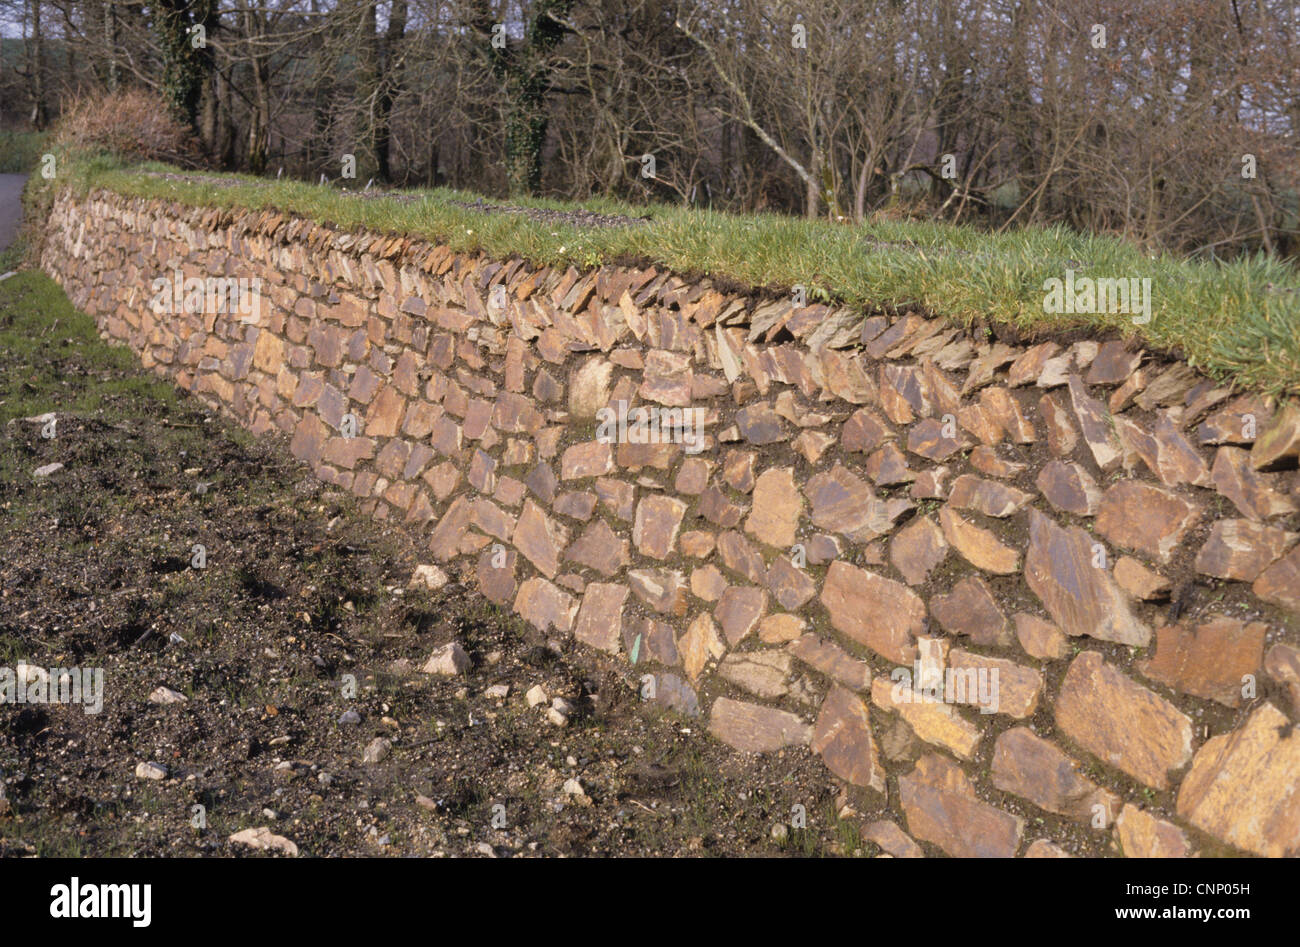 Cornish Hedge, newly constructed earth bank faced with stones, Stithians, Cornwall, England Stock Photo